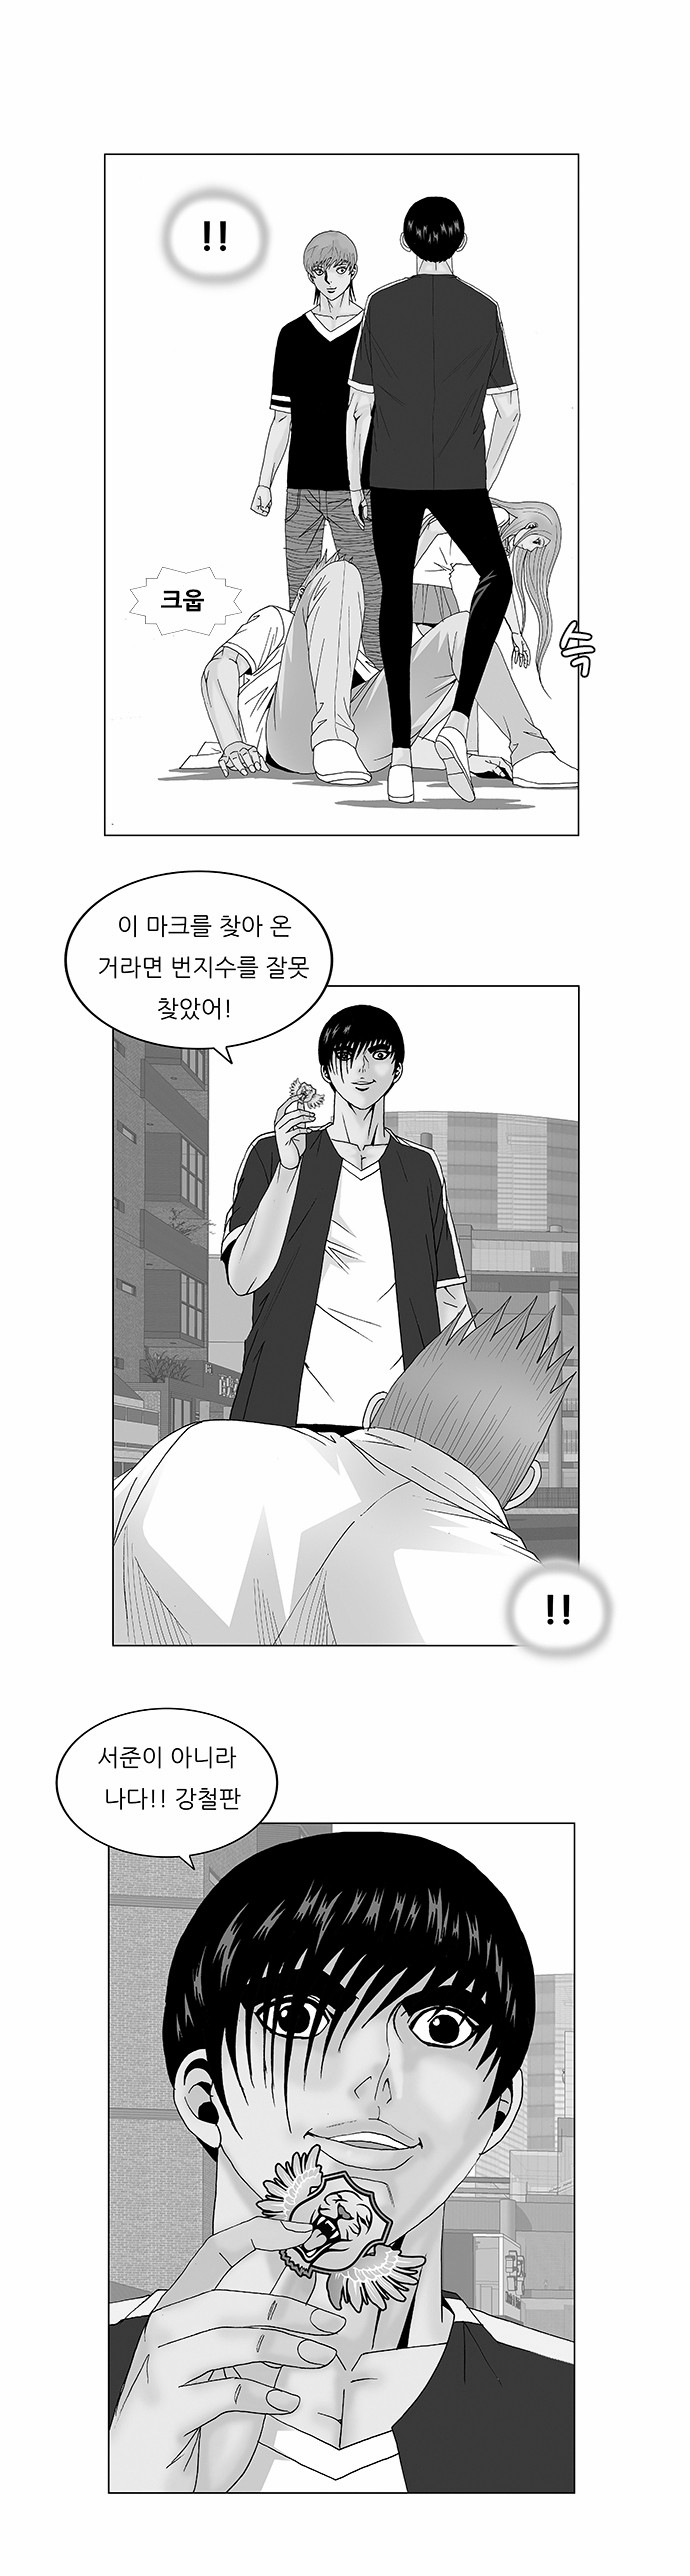 Ultimate Legend - Kang Hae Hyo - Chapter 118 - Page 1